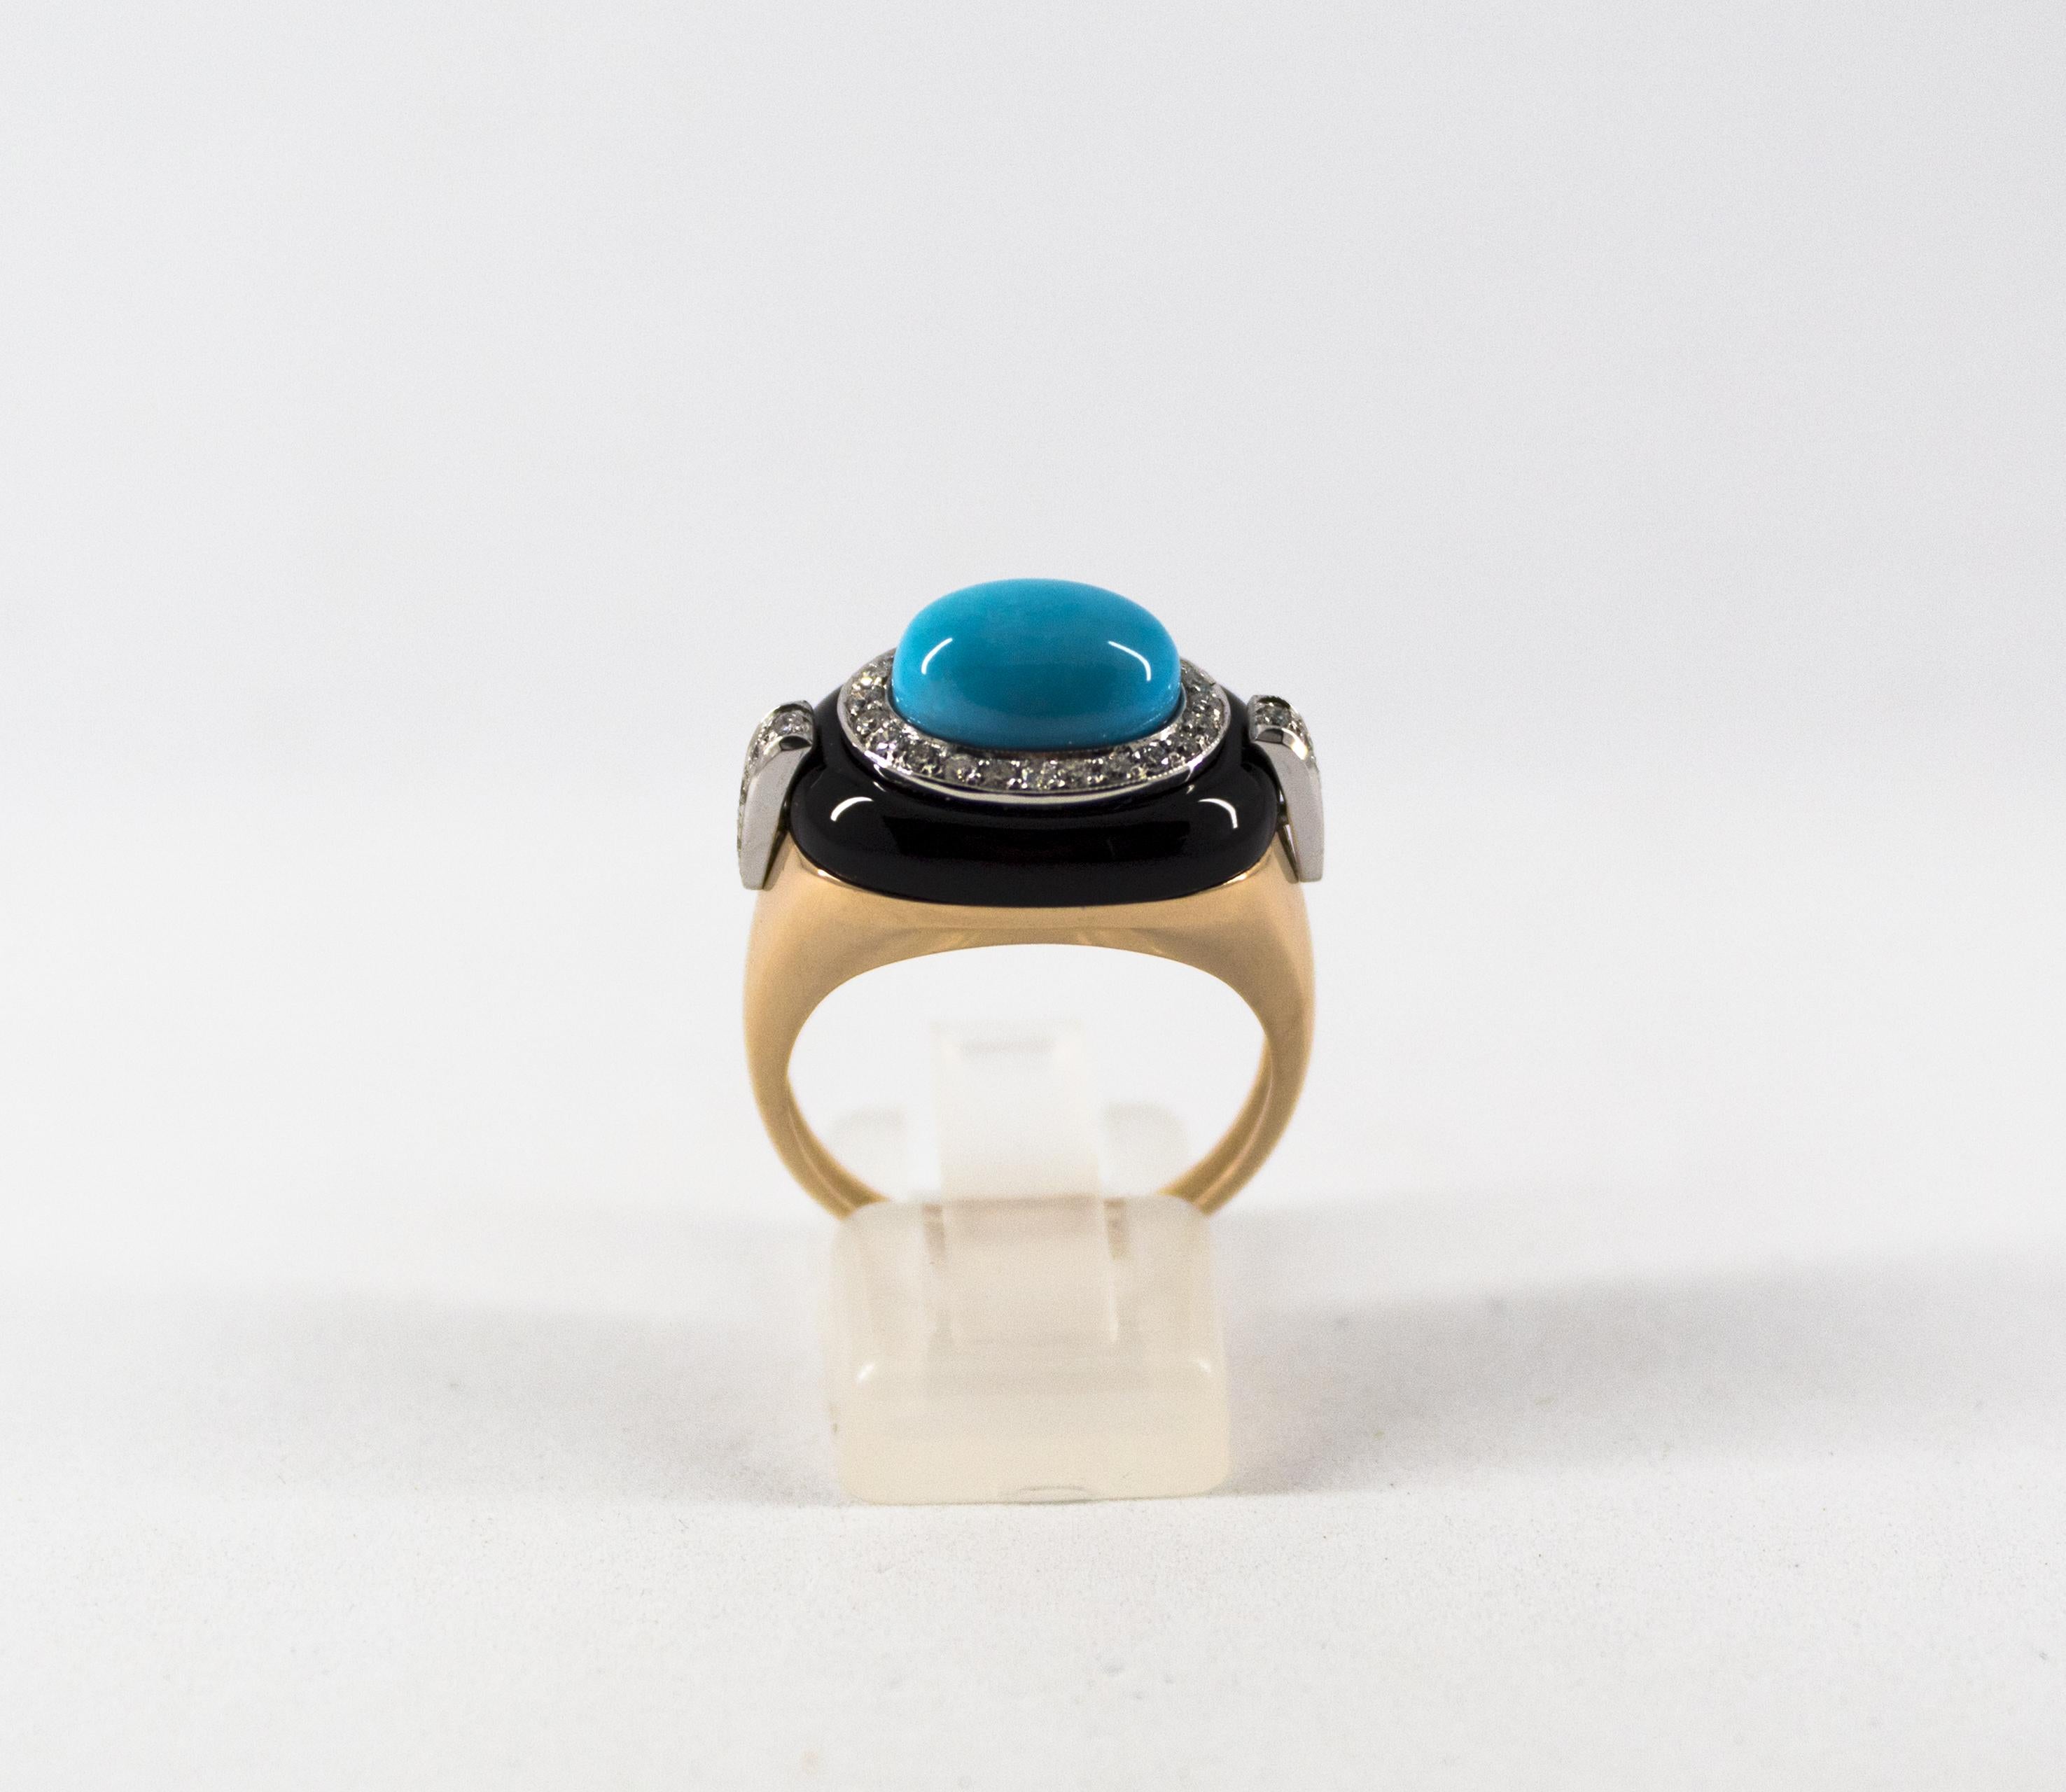 This ring is made of 14K Yellow Gold.
This ring has 0.40 Carats of White Diamonds.
This ring has Turquoise and Onyx.
This Ring is inspired by Renaissance Style and it is available also with Mediterranean Red Coral.
Size ITA: 17 Size USA: 8
We're a